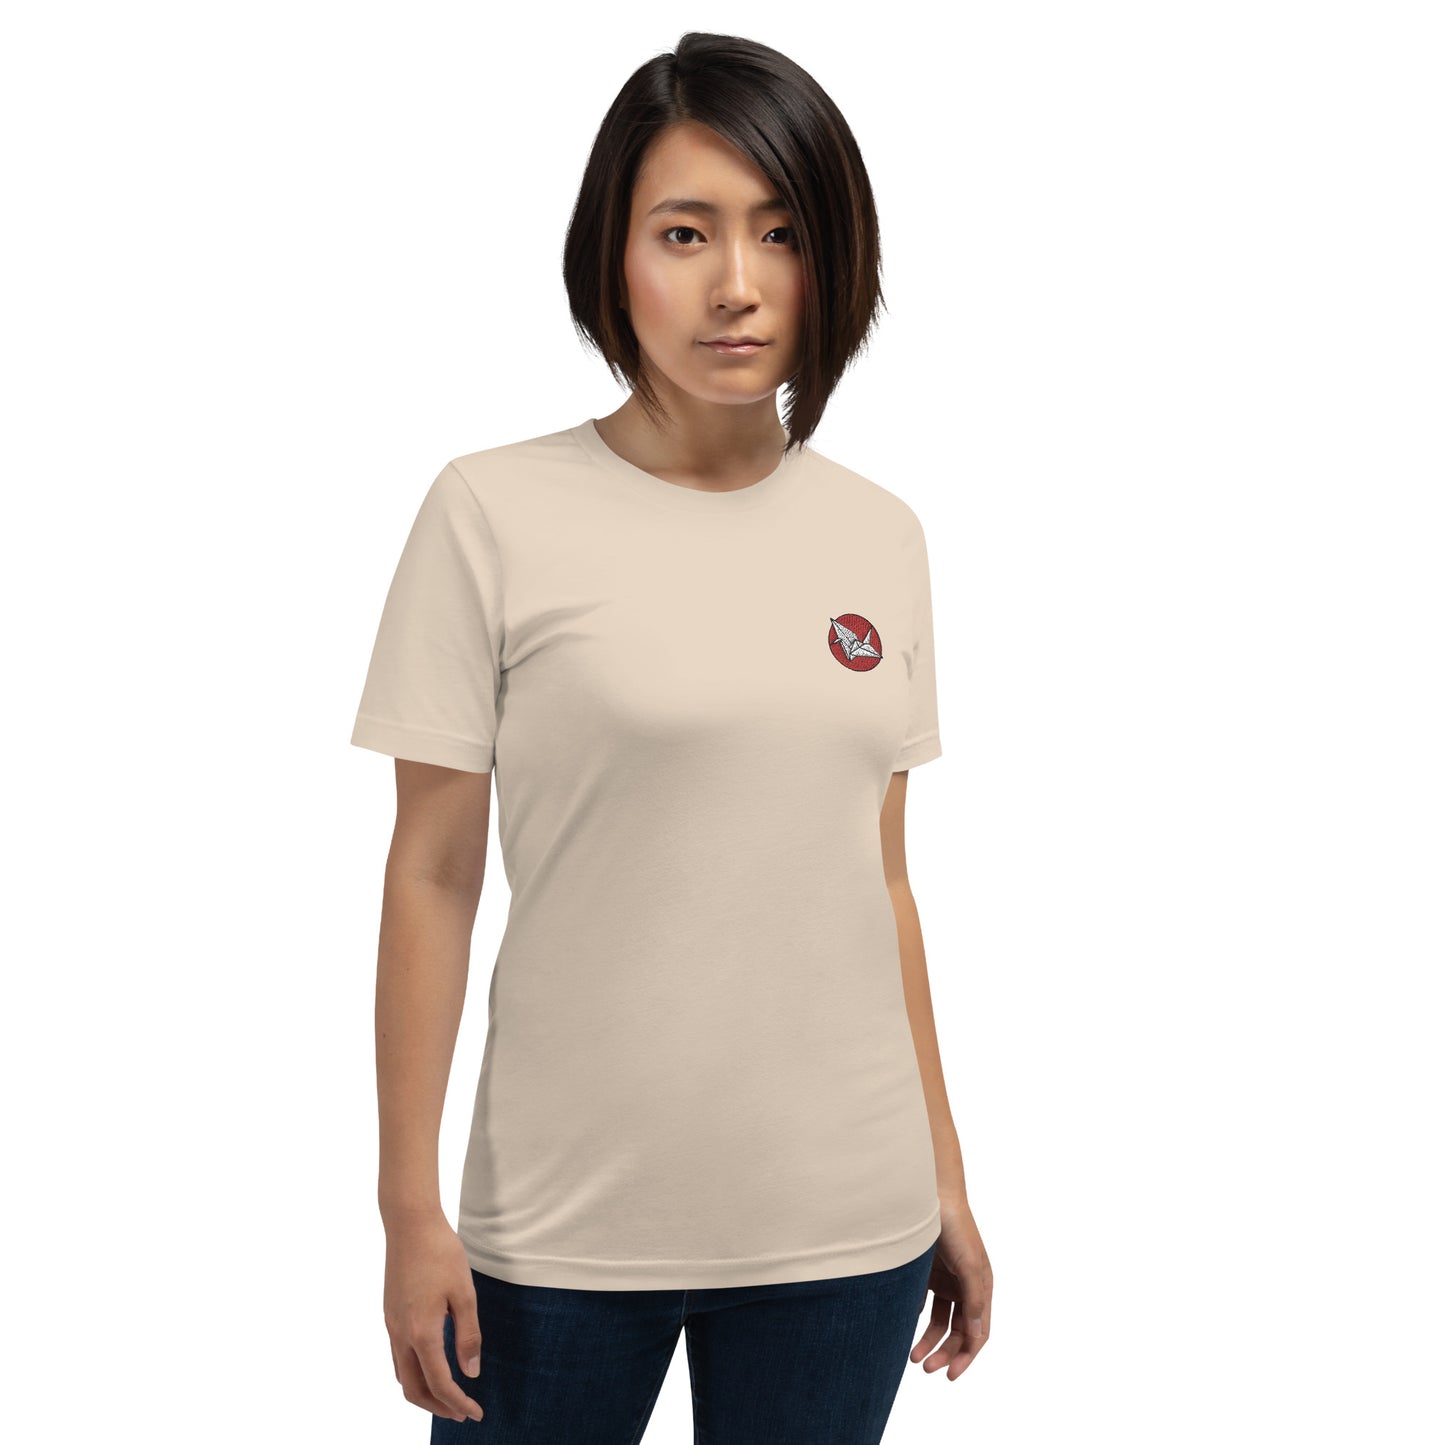  Woman wearing NOMADA Origami Crane embroidered t-shirt, Soft cream colored shirt.